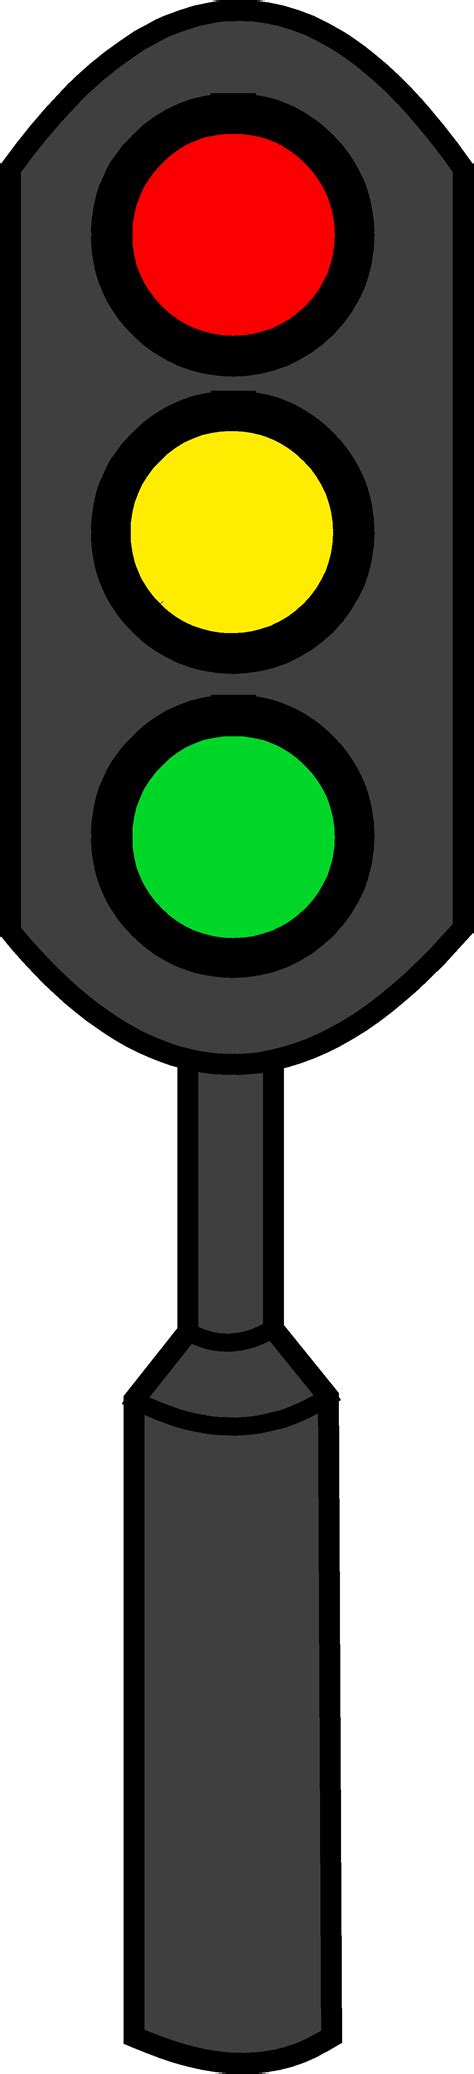 Red Traffic Light Image Clipart Best